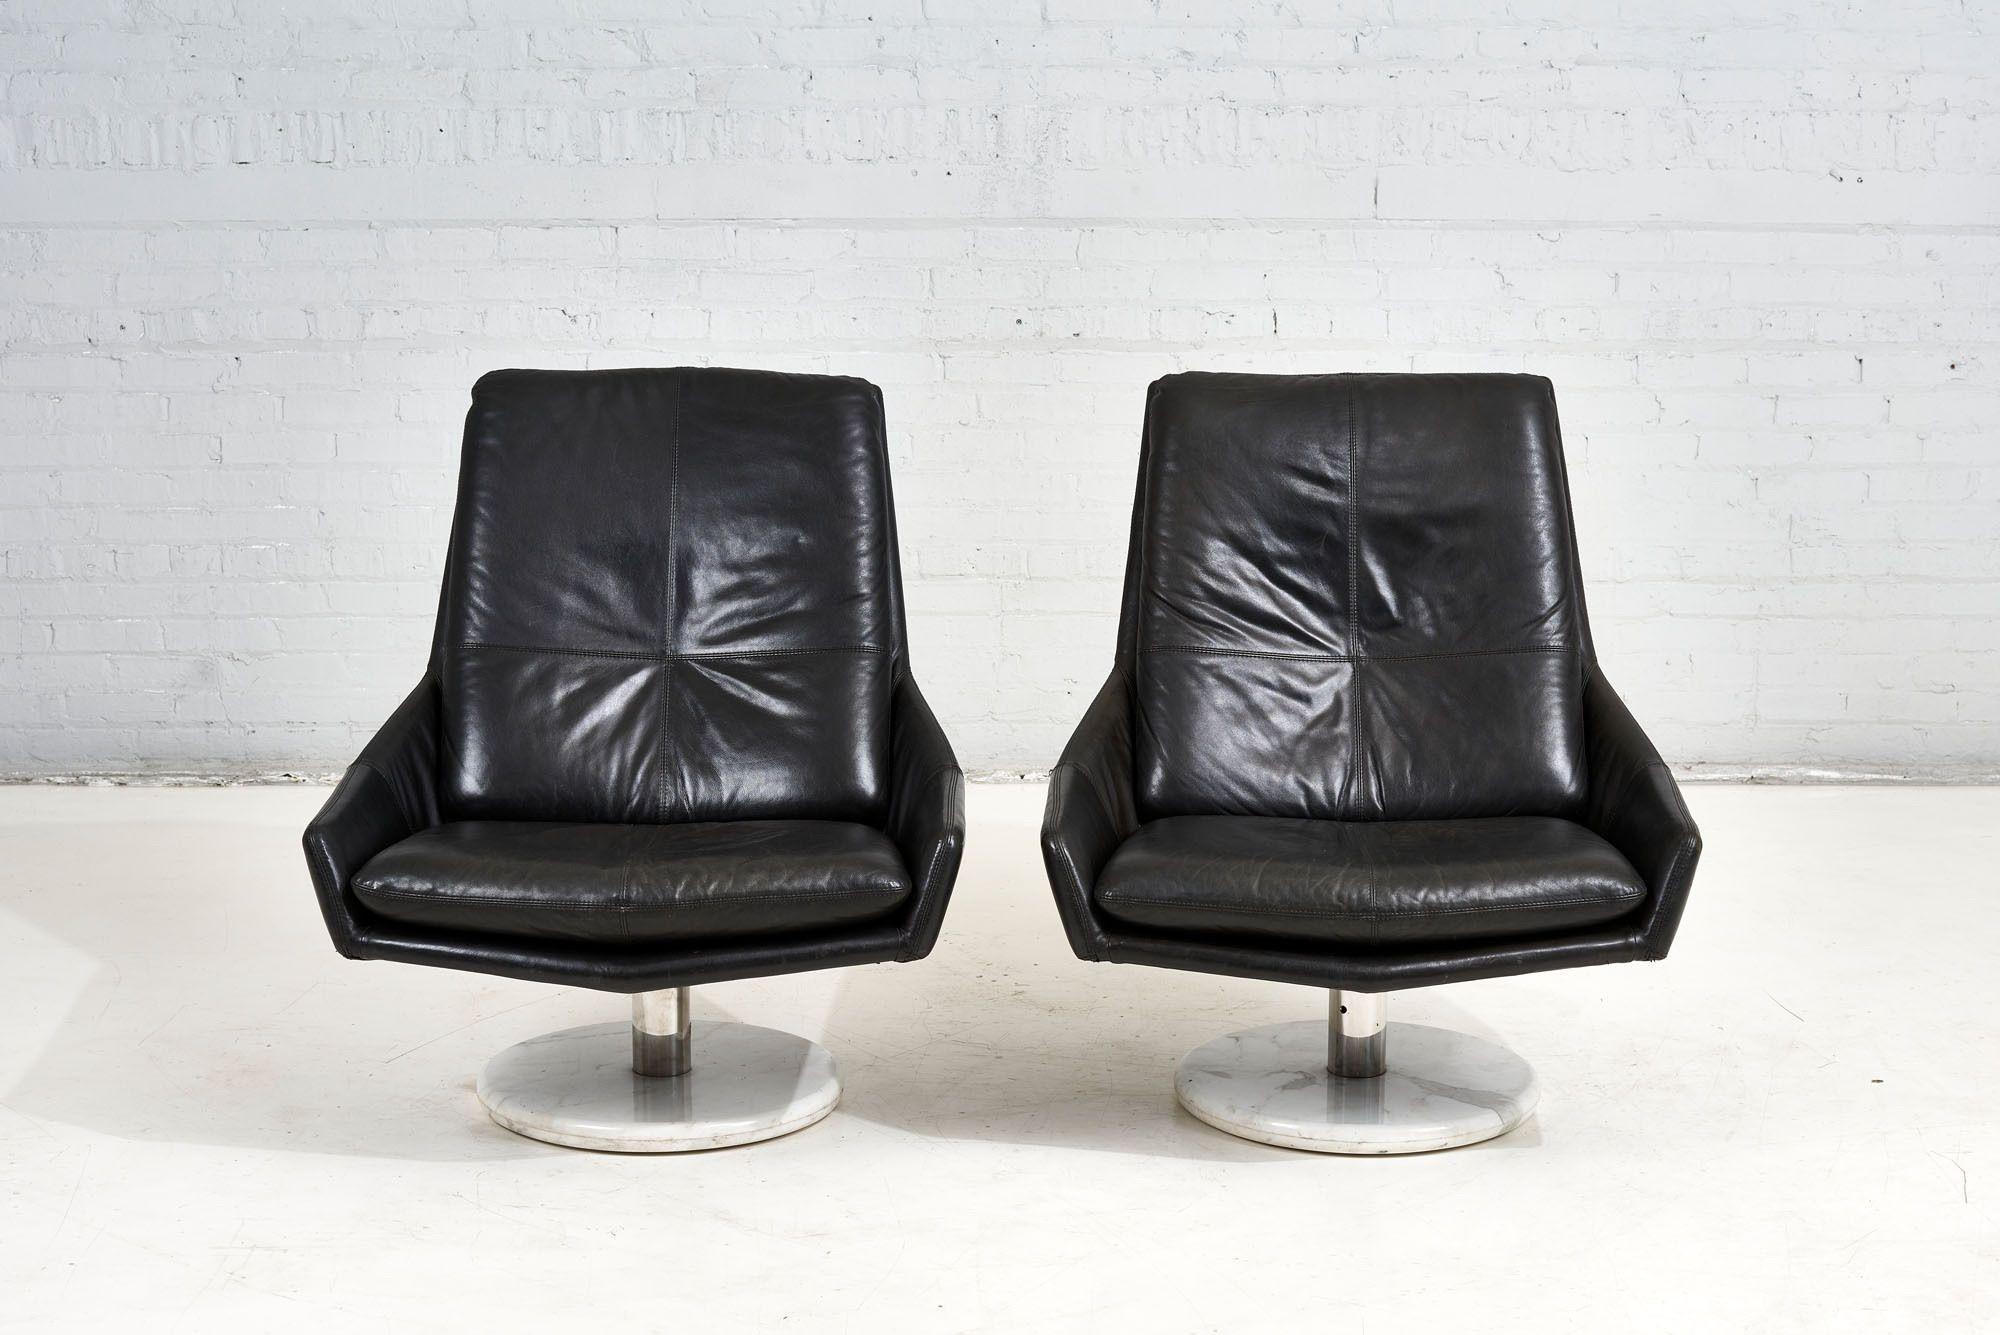 Pair black leather lounge chairs on stainless steel and Calacutta marble bases, circa 1970’s. Very good original condition.

